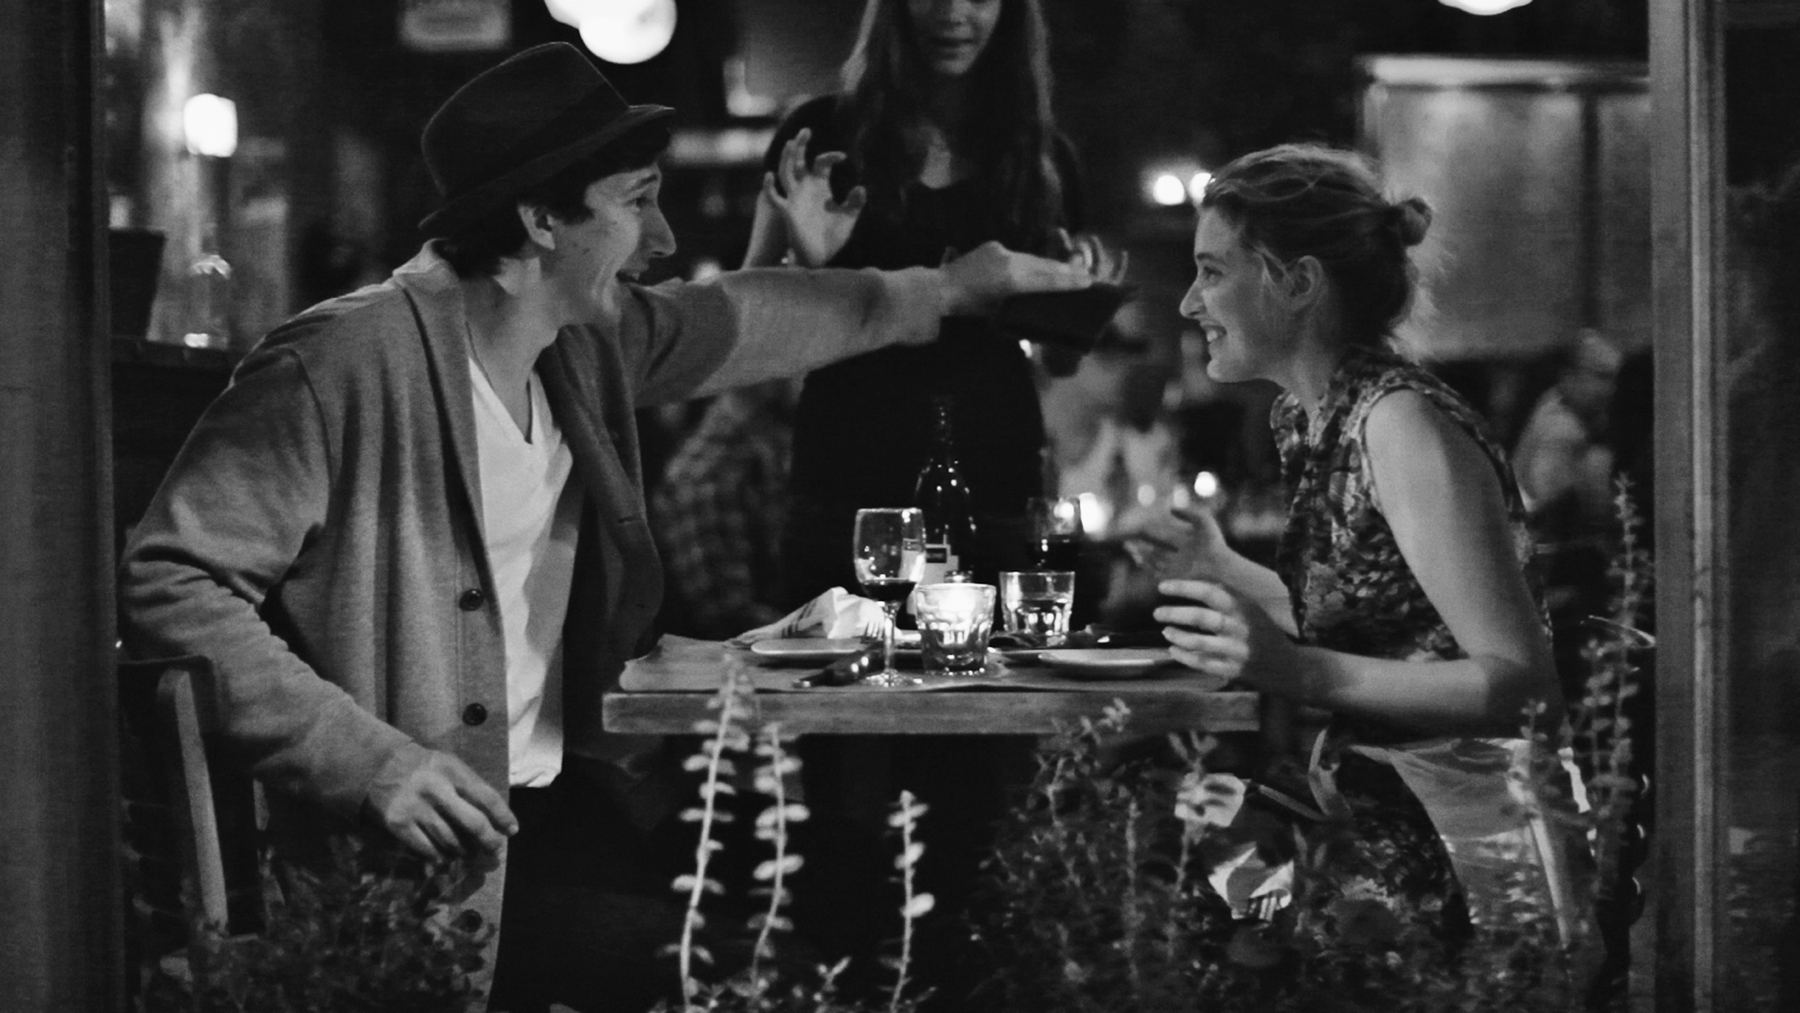 A scene from Noah Baumbach's FRANCES HA, playing at the 56th San Francisco International Film Festival, April 25 - May 9, 2013.